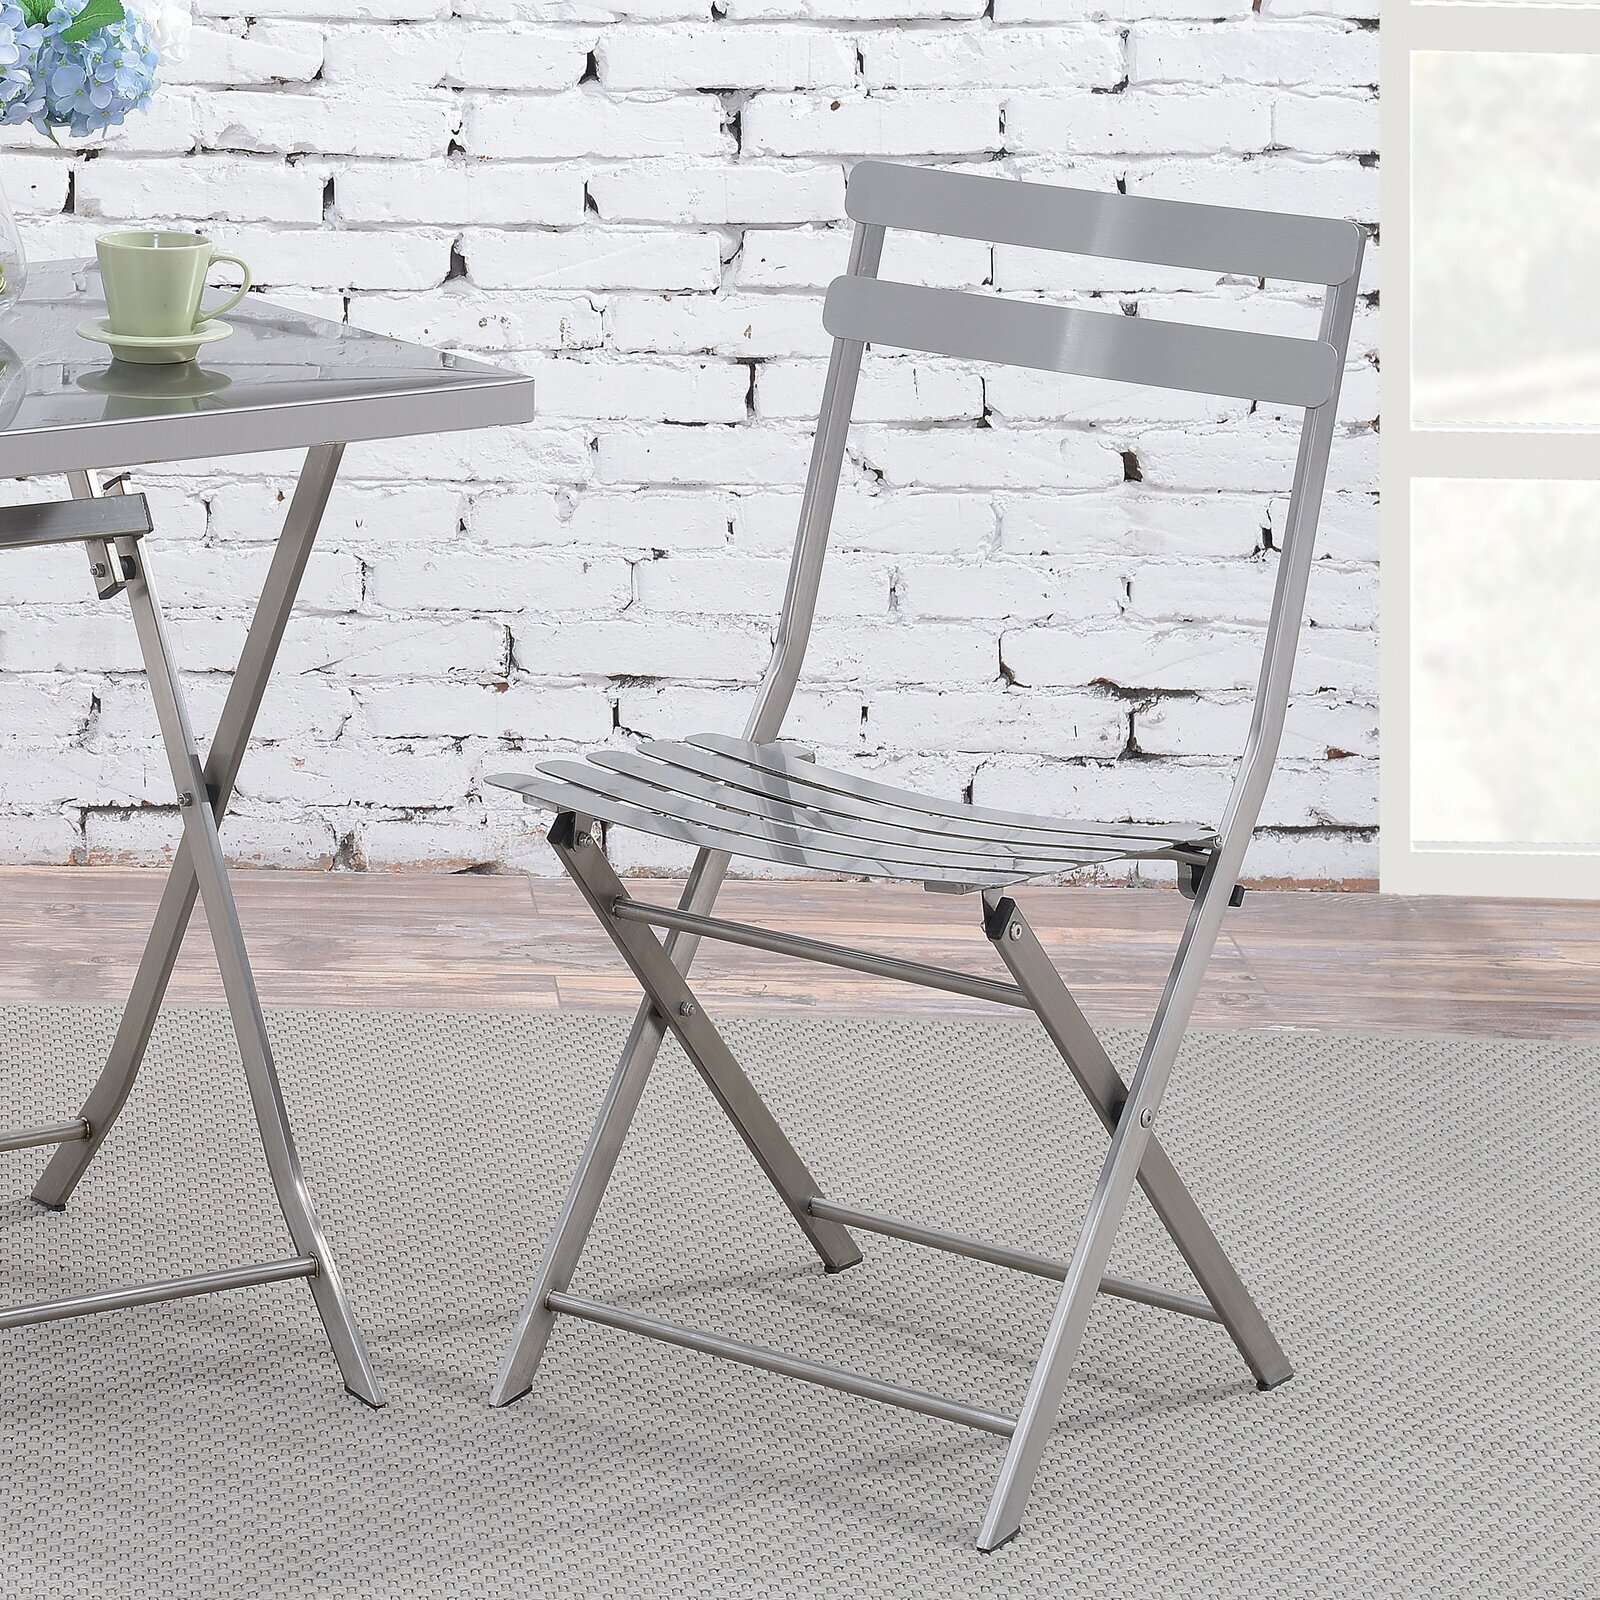 Bistro fold up dining chairs